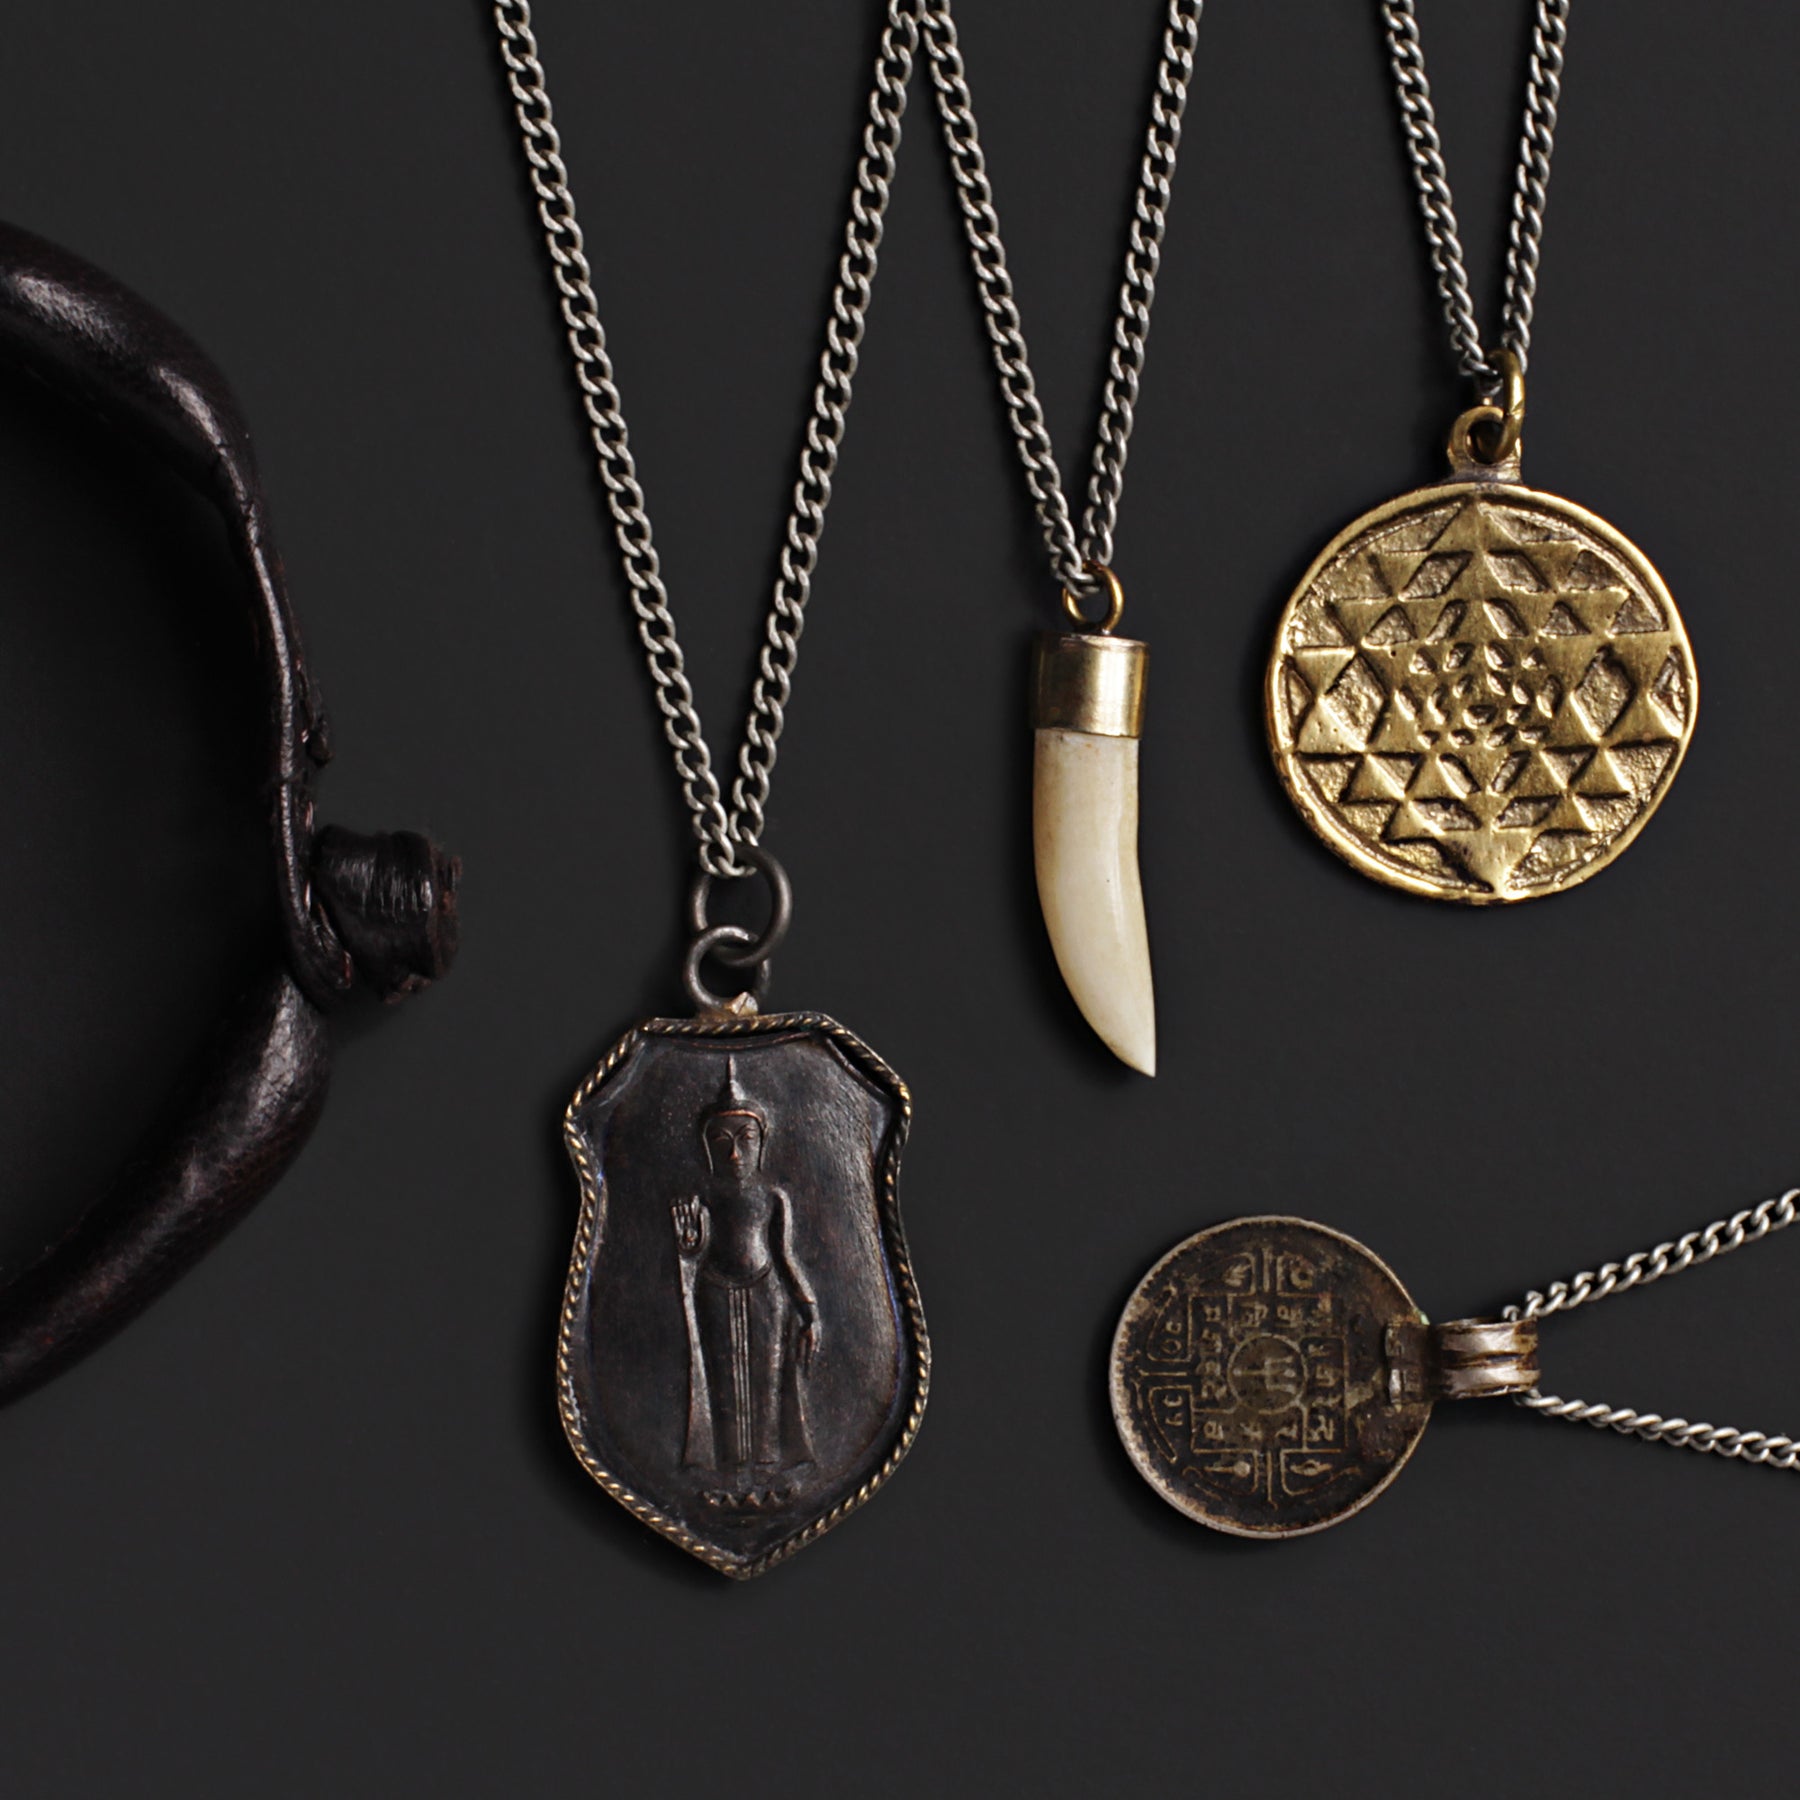 New necklaces and bracelets releases!